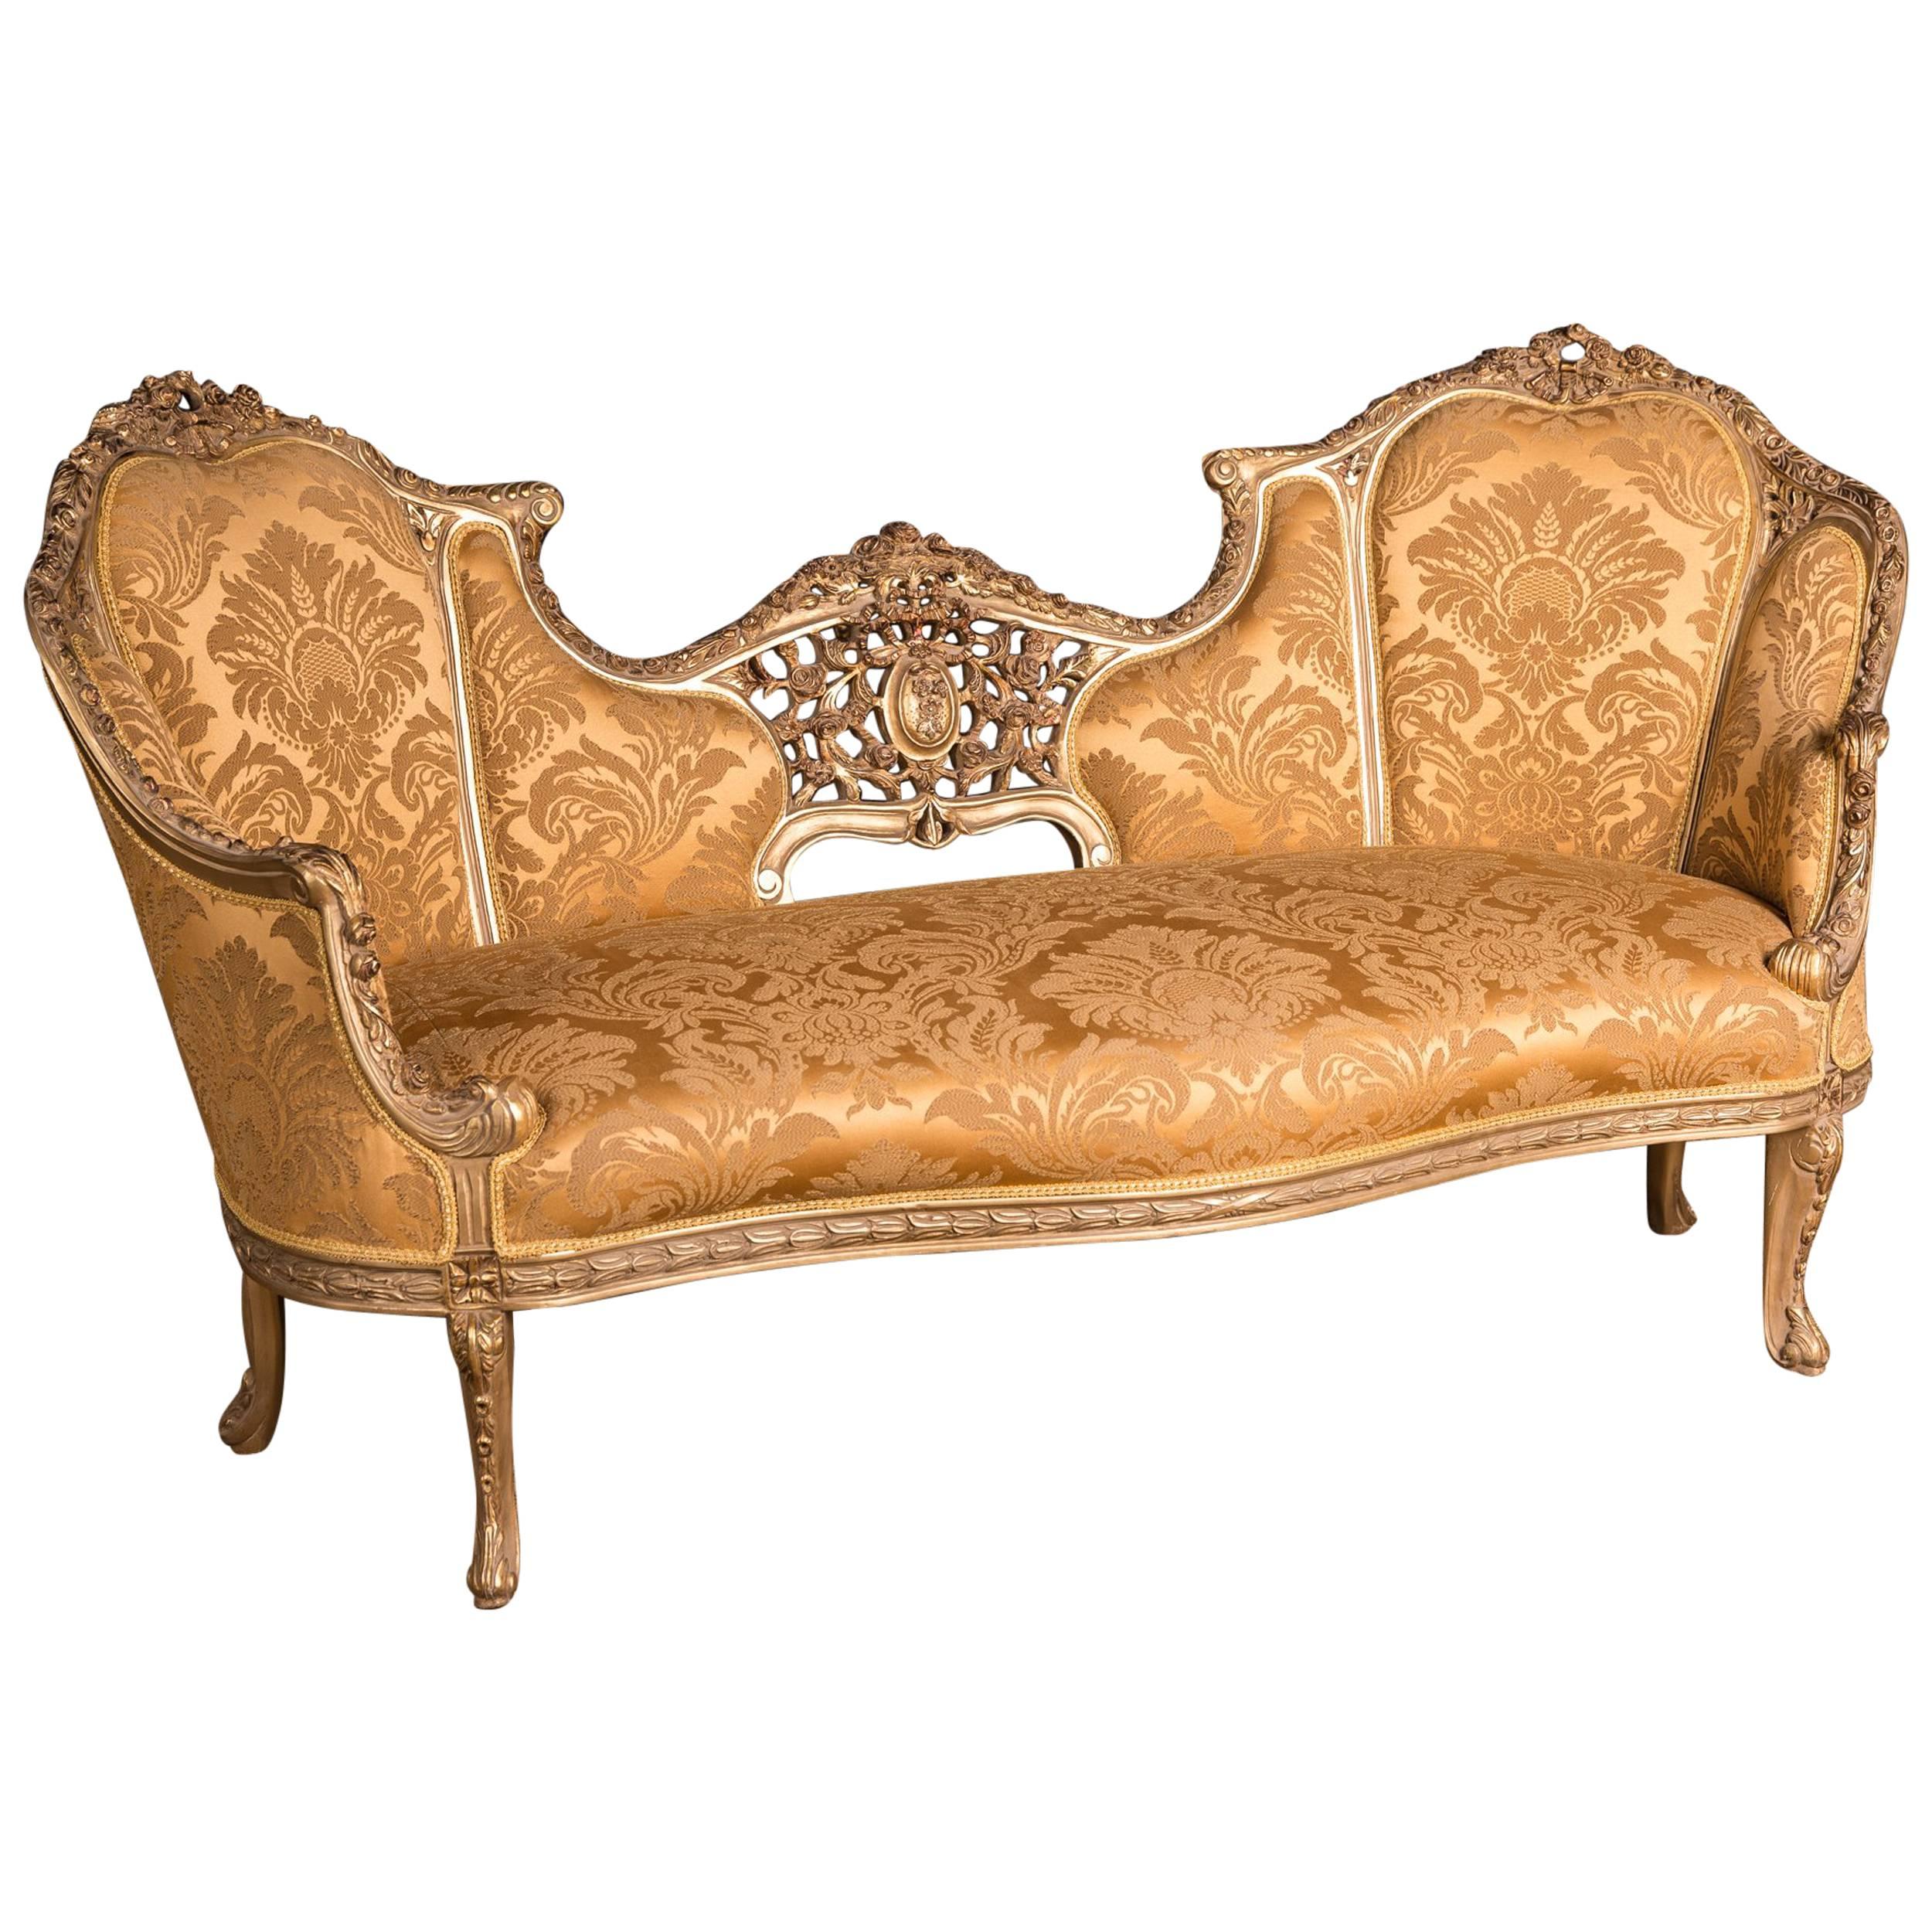 Large Elegant French Sofa Canape in Louis Quinze Style